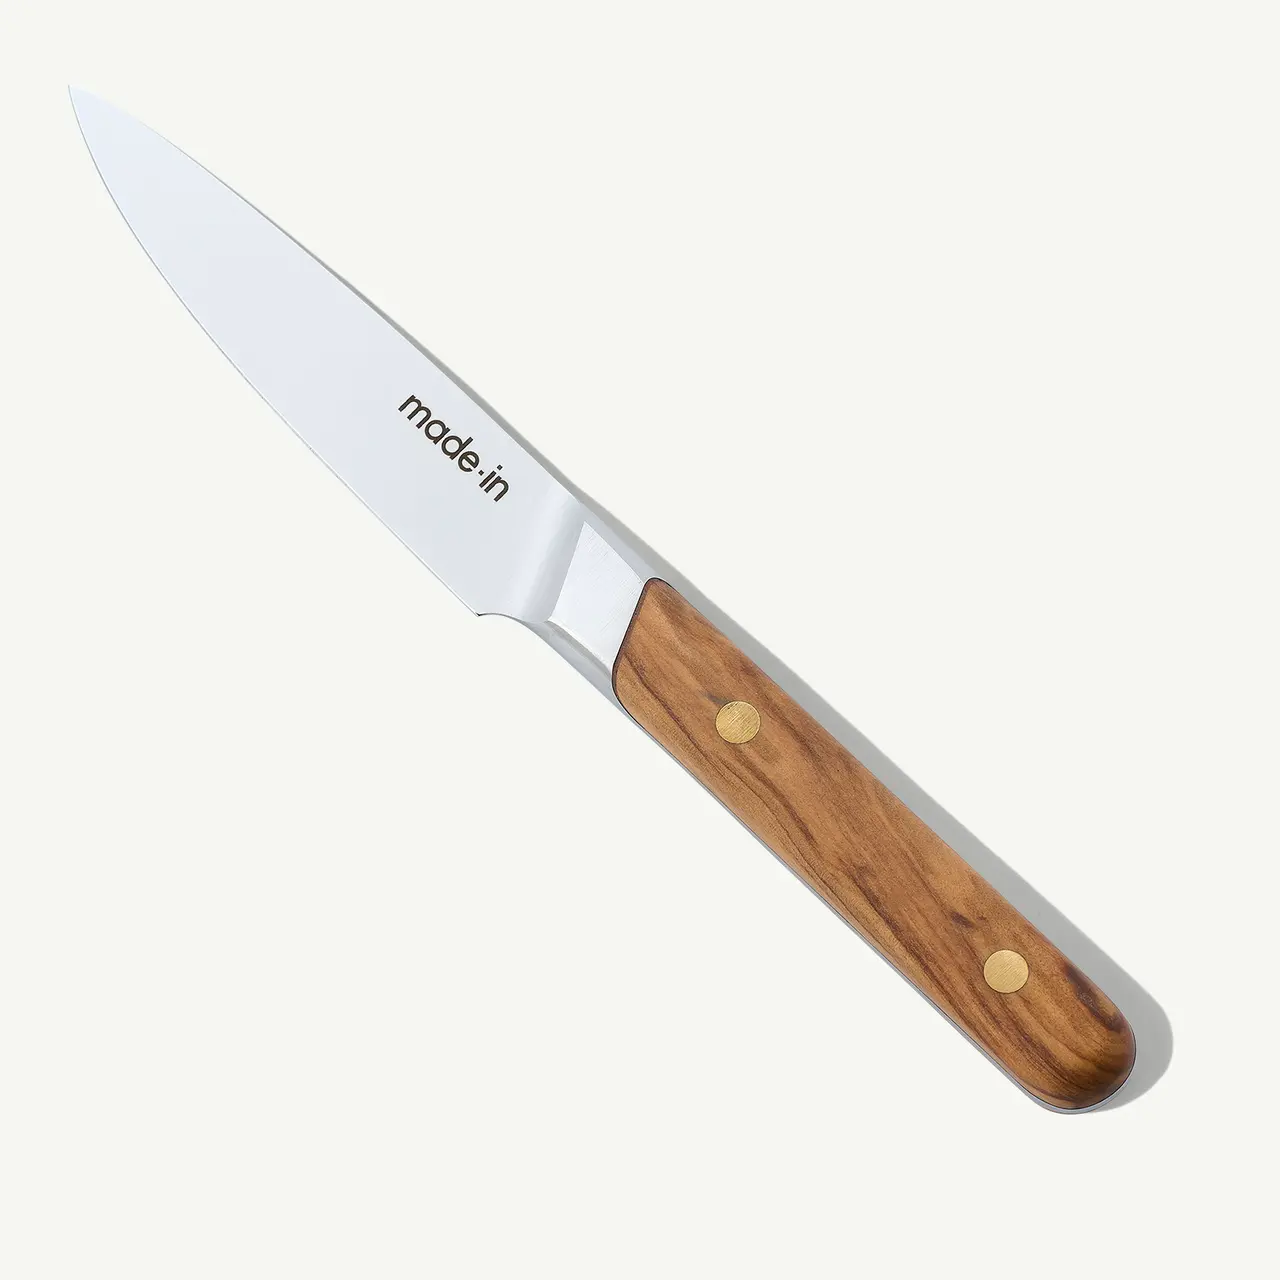 A stainless steel chef's knife with a wooden handle and the text "made in" on the blade, isolated on a white background.